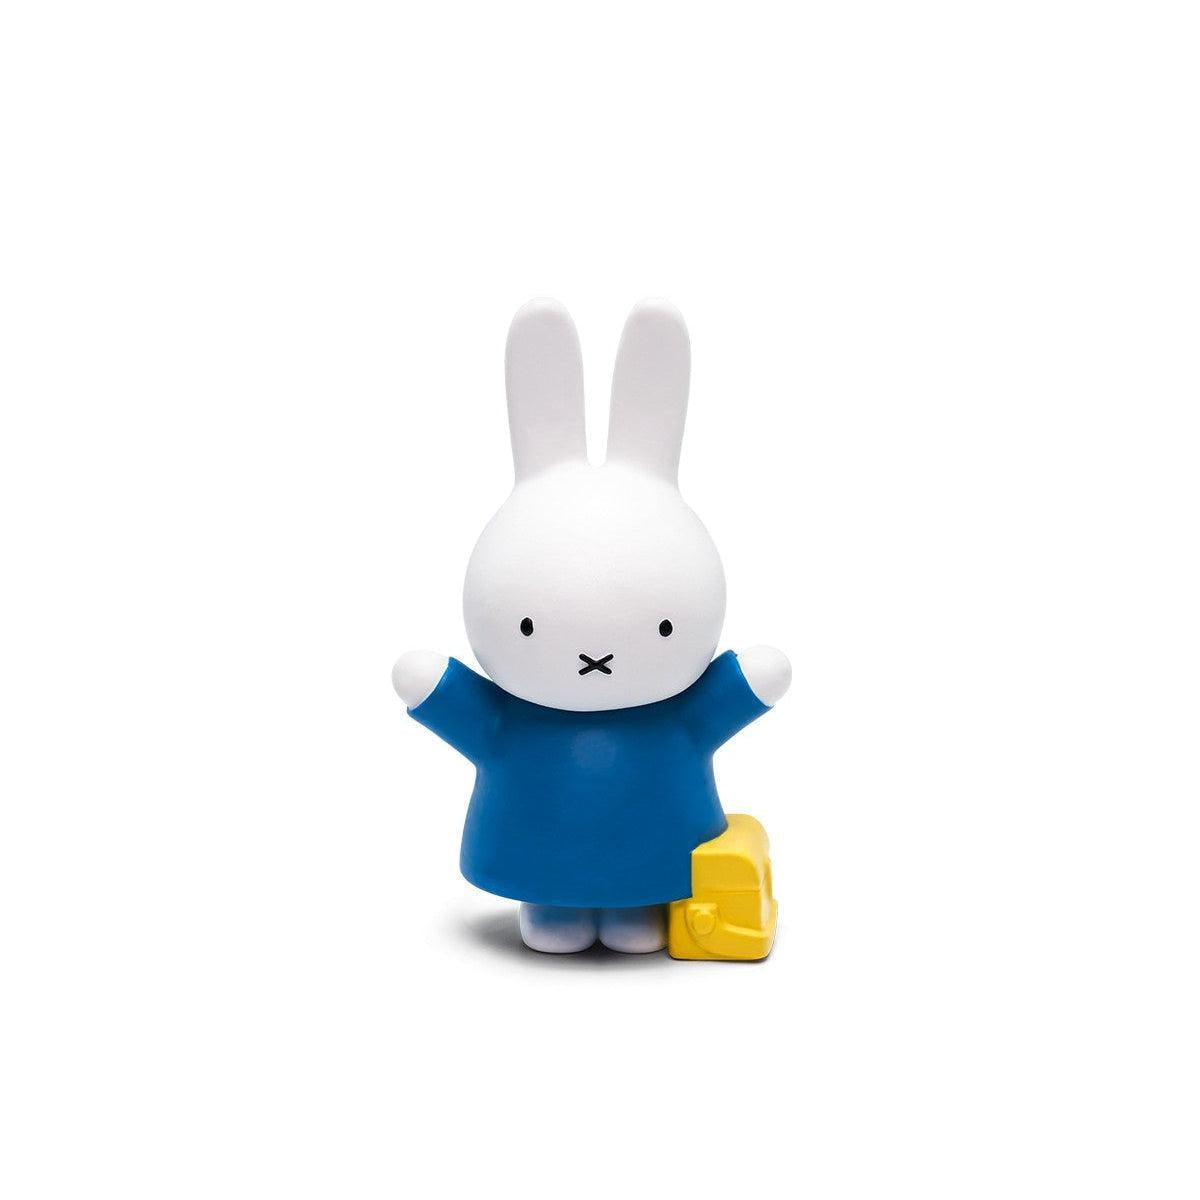 Tonies - Miffy - Audio Character for use with Toniebox Player